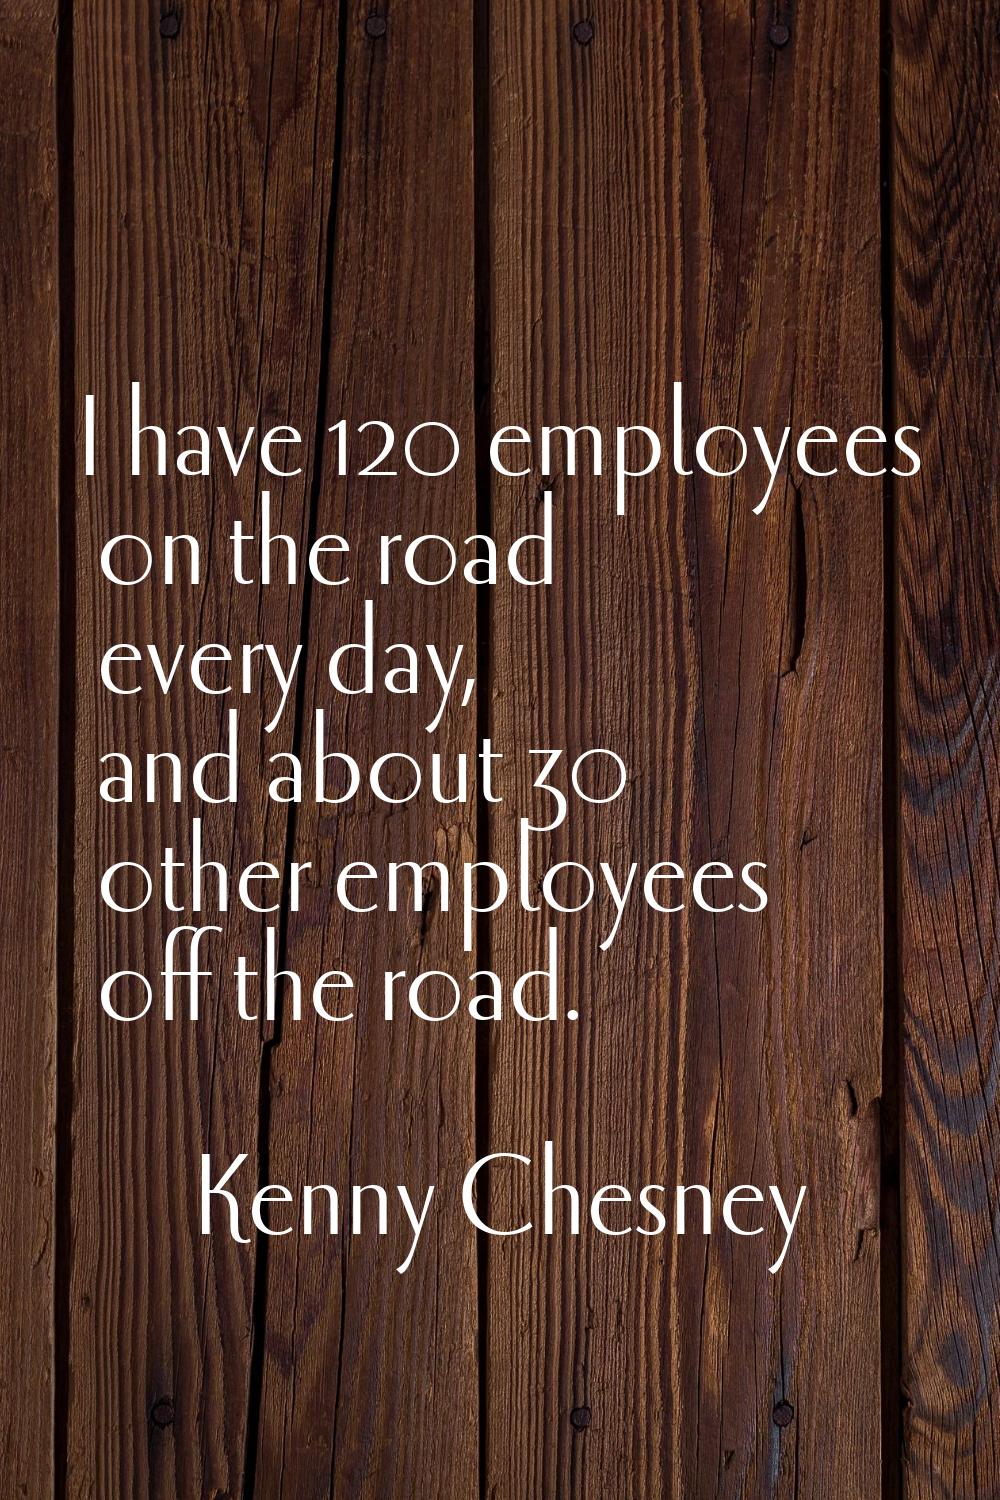 I have 120 employees on the road every day, and about 30 other employees off the road.